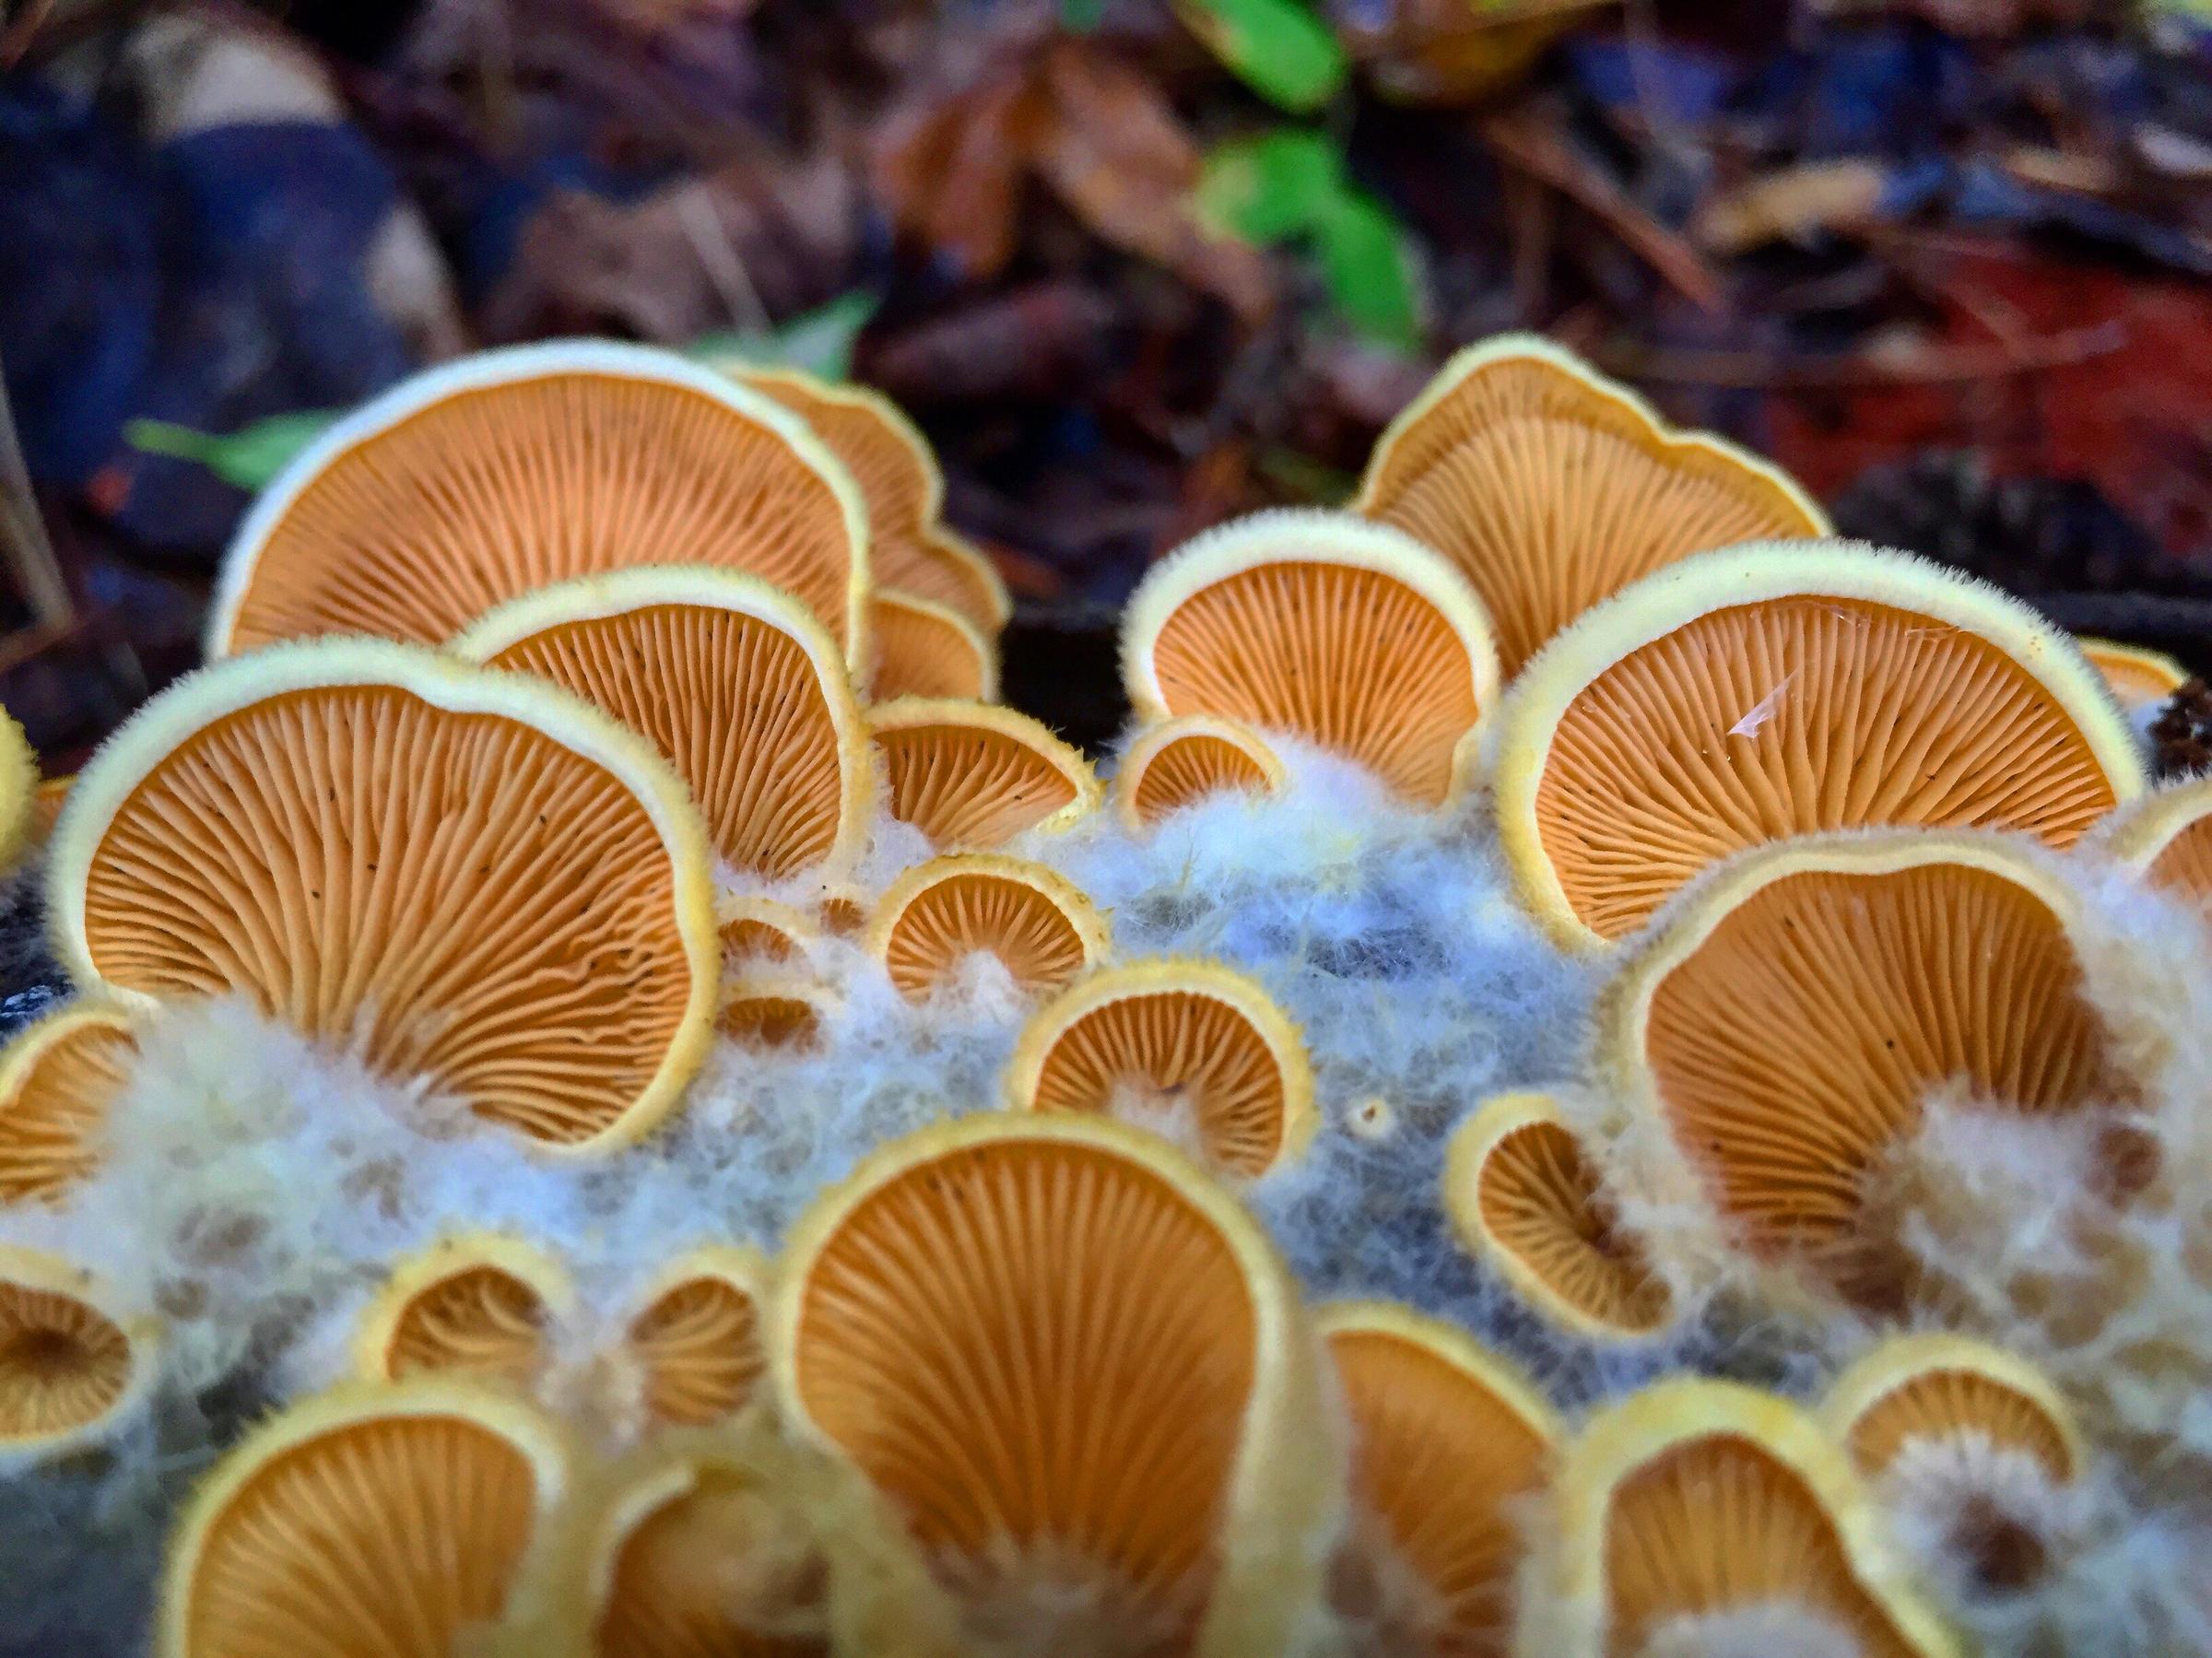 PHOTOS: Discovering The Hidden World Of Fungi In Western North ...